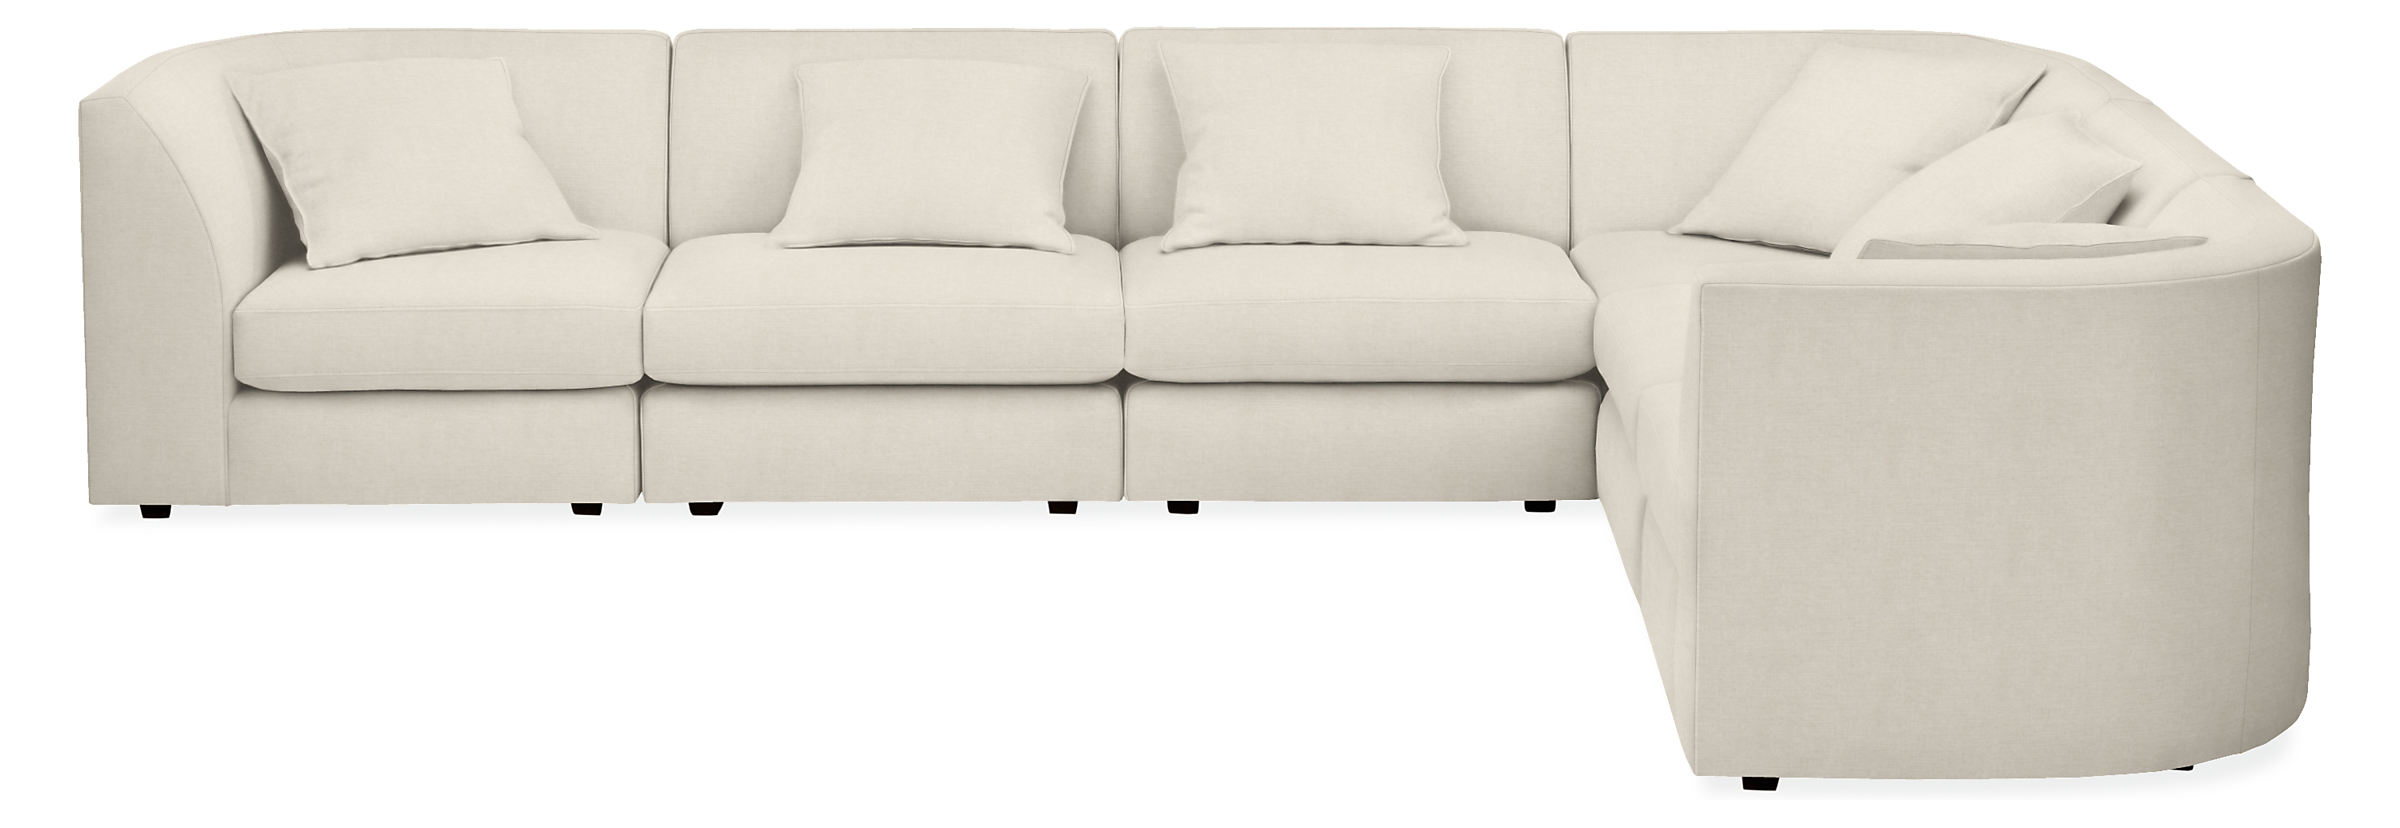 Astaire 138x106" Six-Piece Modular Sectional In Fabric